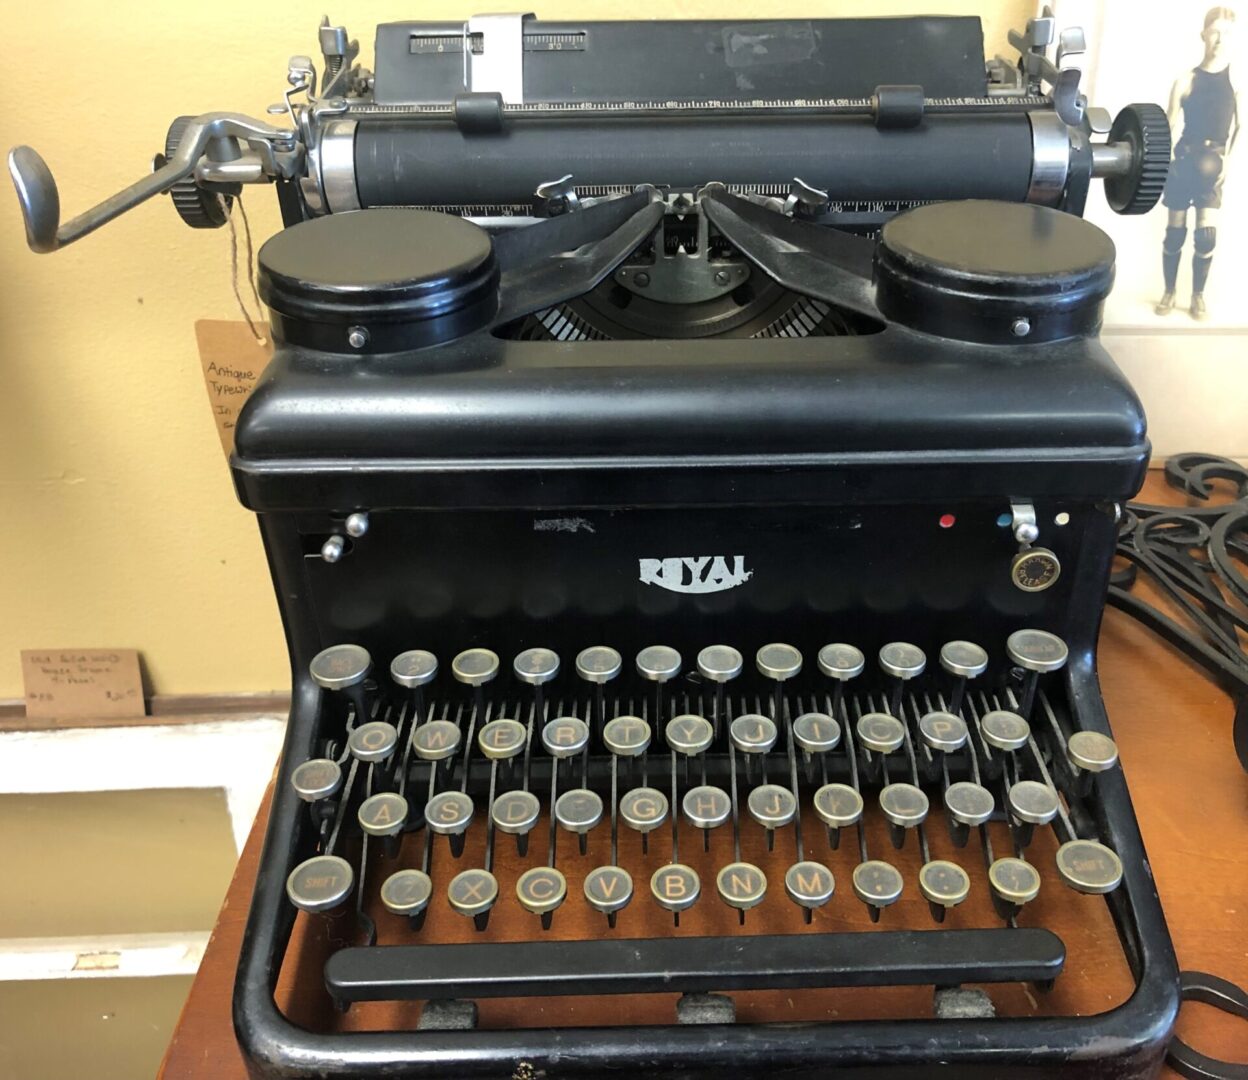 A black typewriter sitting on top of a wooden table.